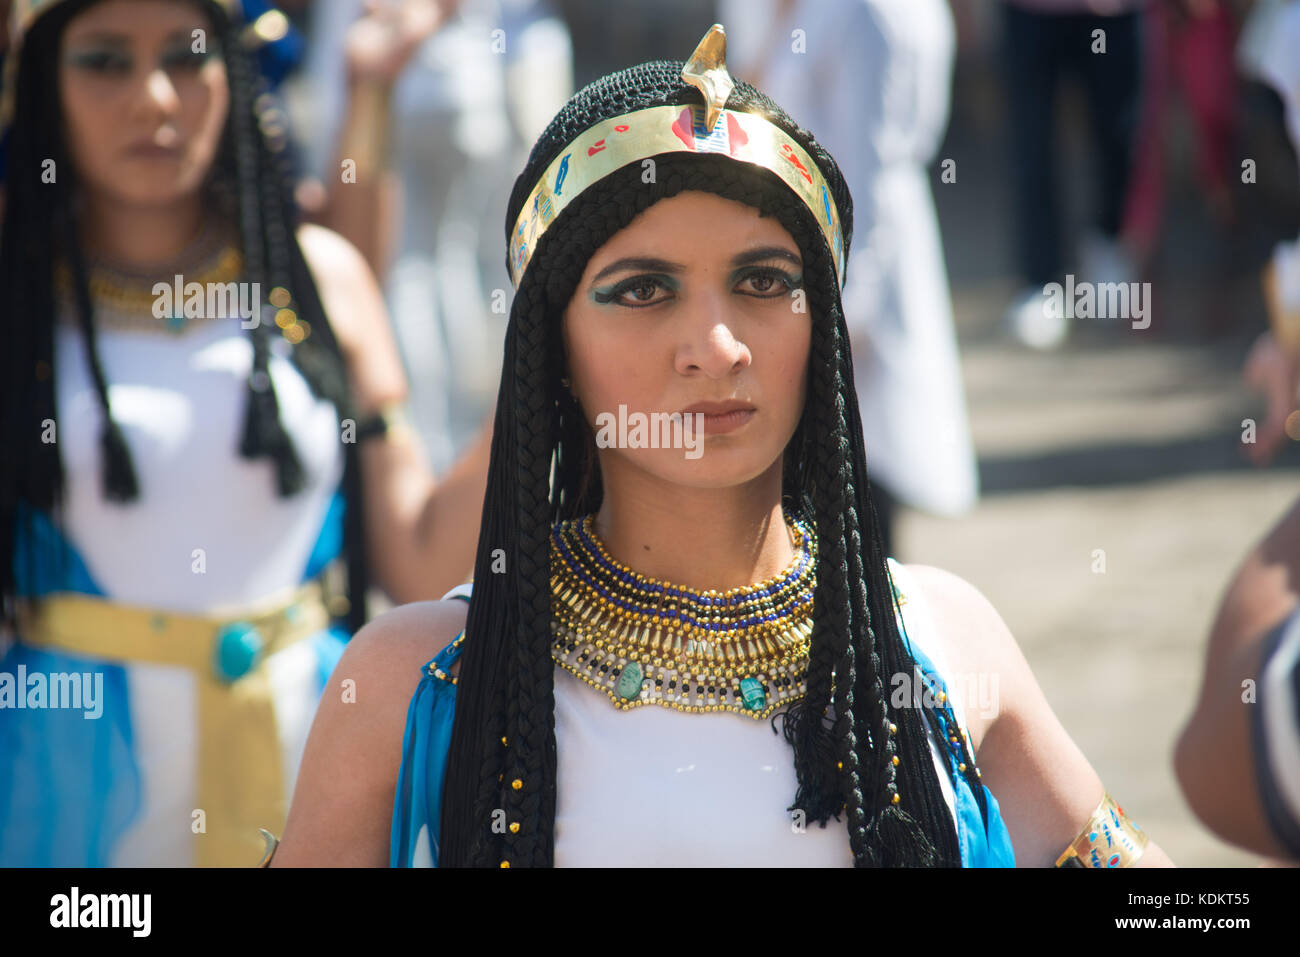 Alexandria, Egypt - 30 September 2017 - The inaugural festival in honor of Cleopatra coincided today with World Tourism Day.  The event included a parade along the corniche seafront with Cleopatra dressed in her golden royal robes and distinctive crown, accompanied by her two ladies-in-waiting and six officers dressed as ancient Egyptian soldiers.  The event also brings awareness about new discoveries made in the bottom of the Mediterranean Sea in the Alexandria area where 72 wrecks, 20 ships and army aircrafts from WWI and WWII and others that date back to 300 BC have been discovered.  An ini Stock Photo